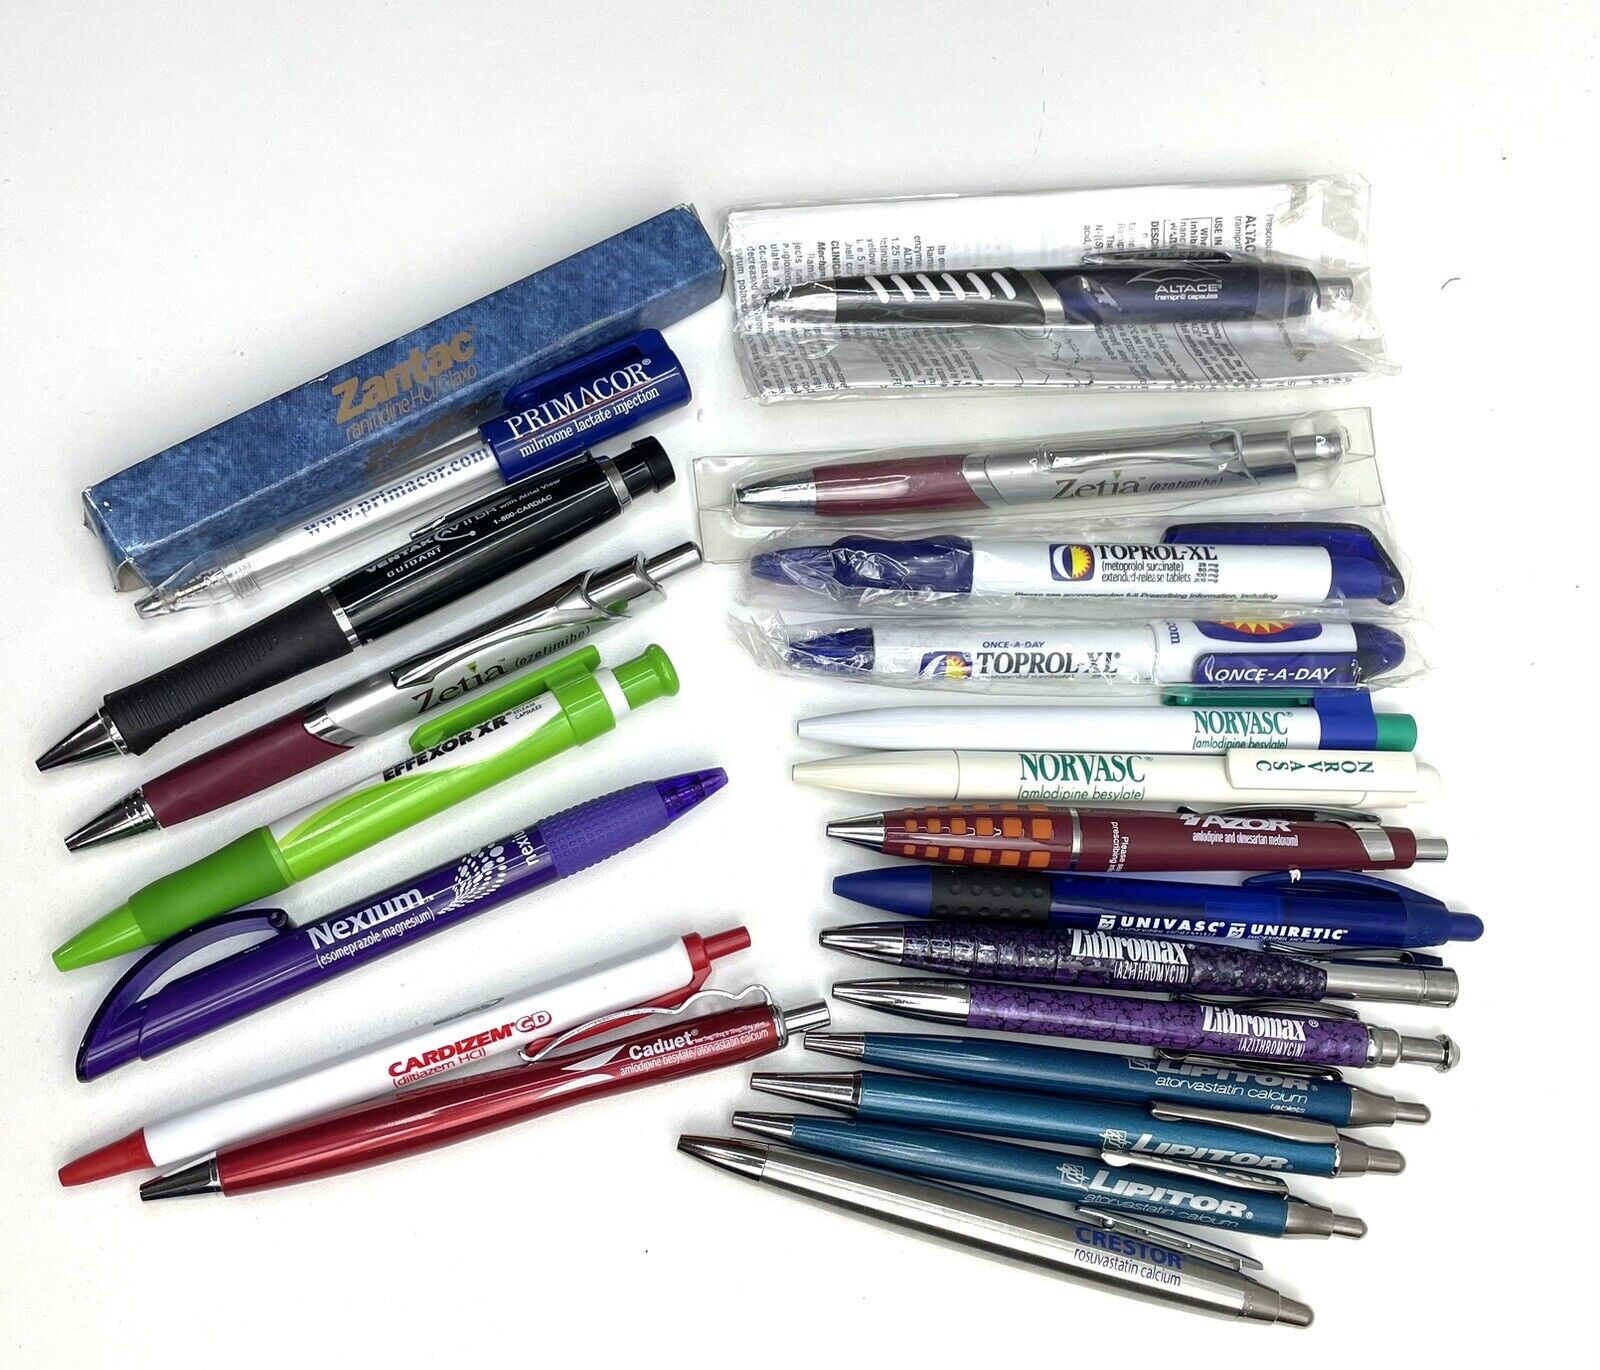 Pharmaceutical Drug Rep Pens Miscellaneous Mixed Lot of 22 